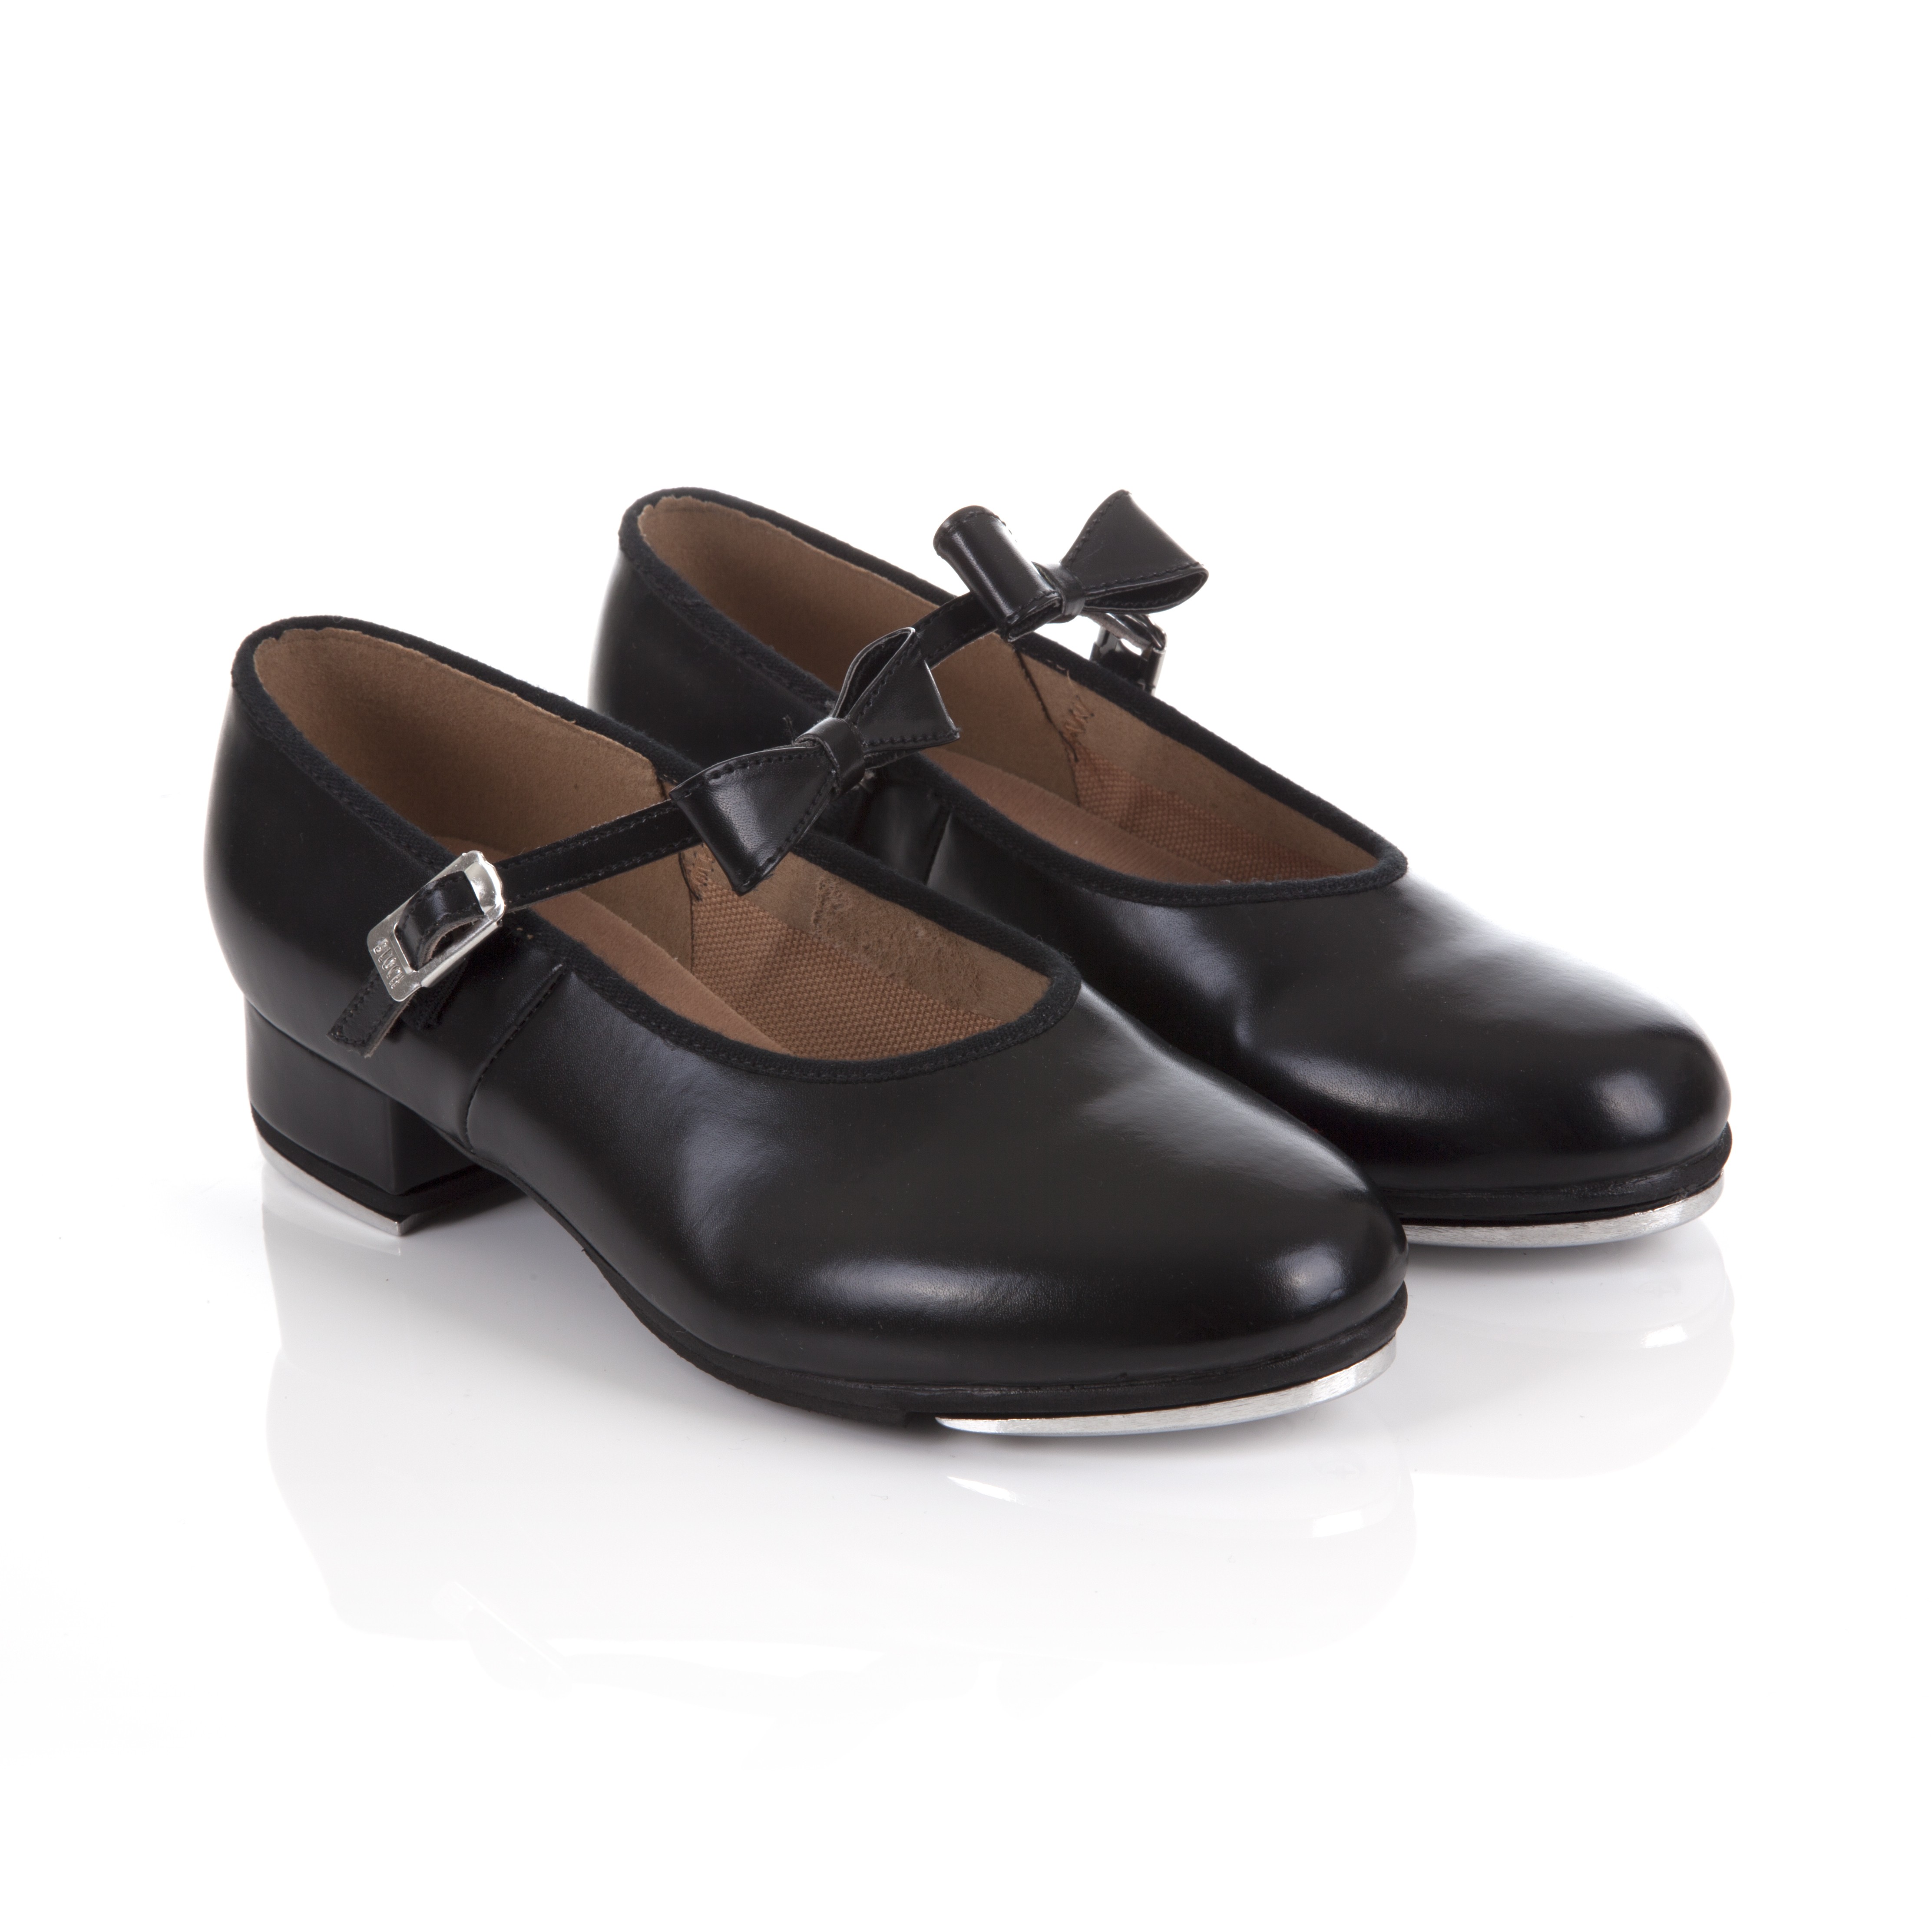 Bloch Merry Jane Tap Shoes